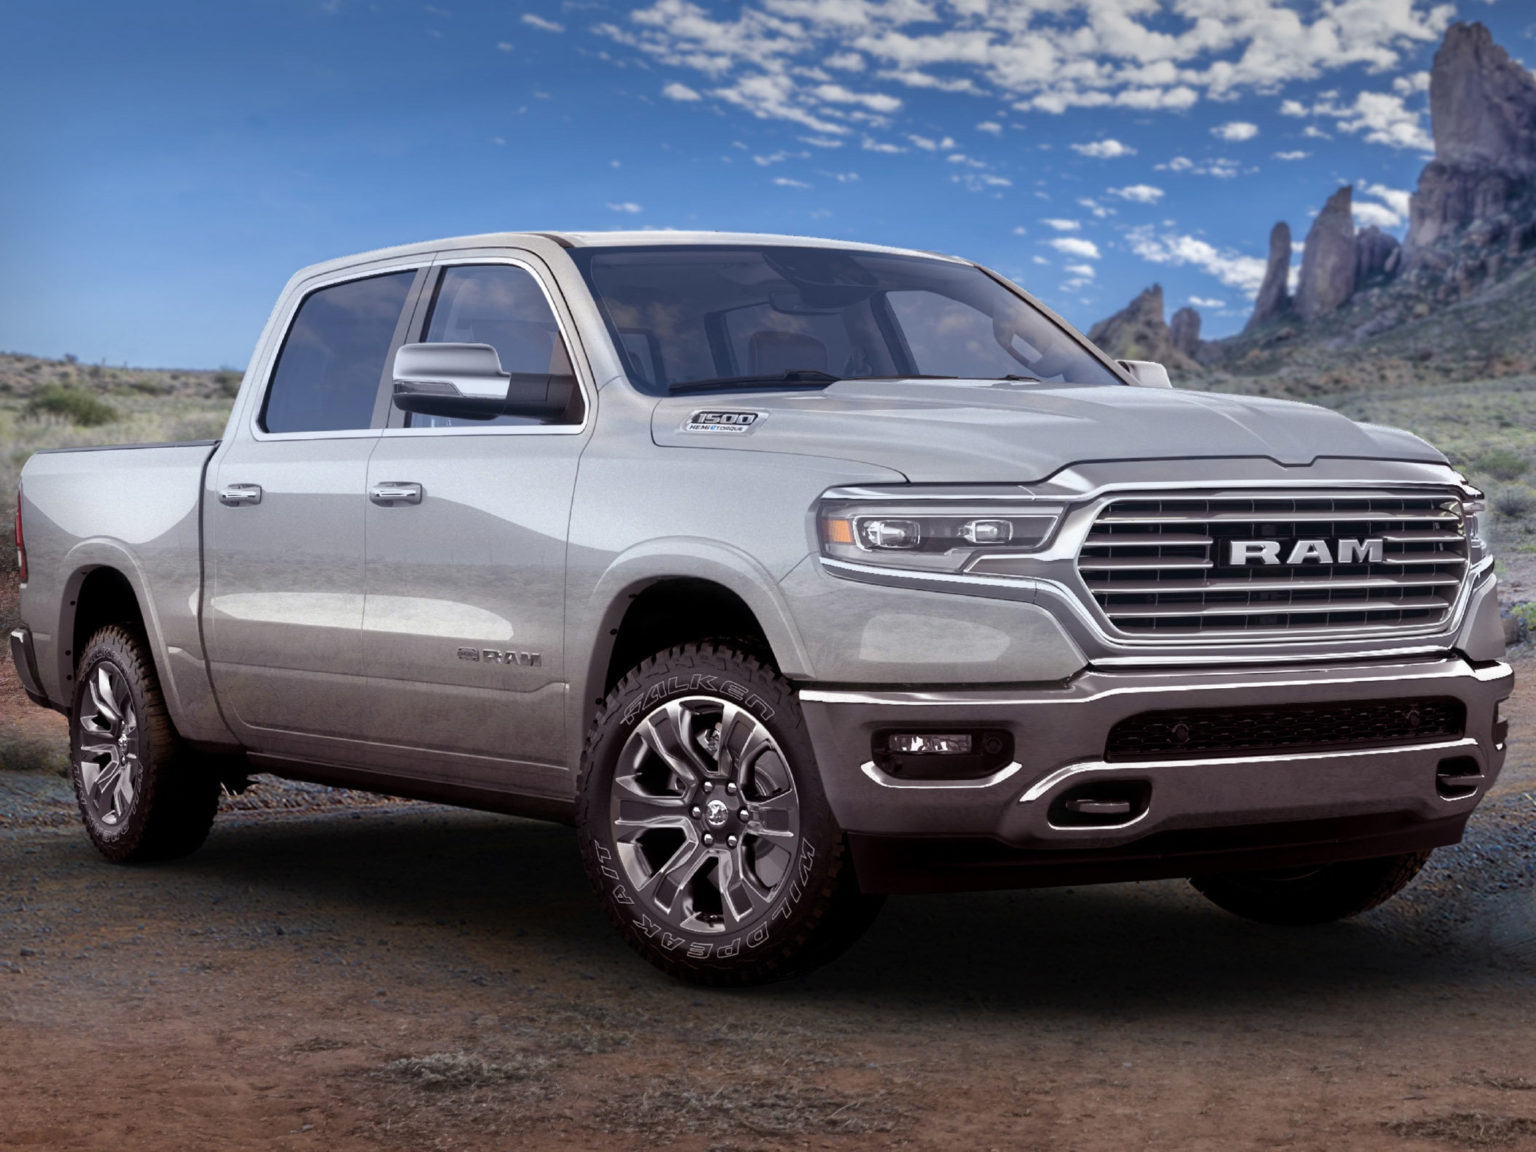 The 2021 Ram 1500 Limited Longhorn 10th Anniversary Edition is a upmarket truck for a discerning customer.